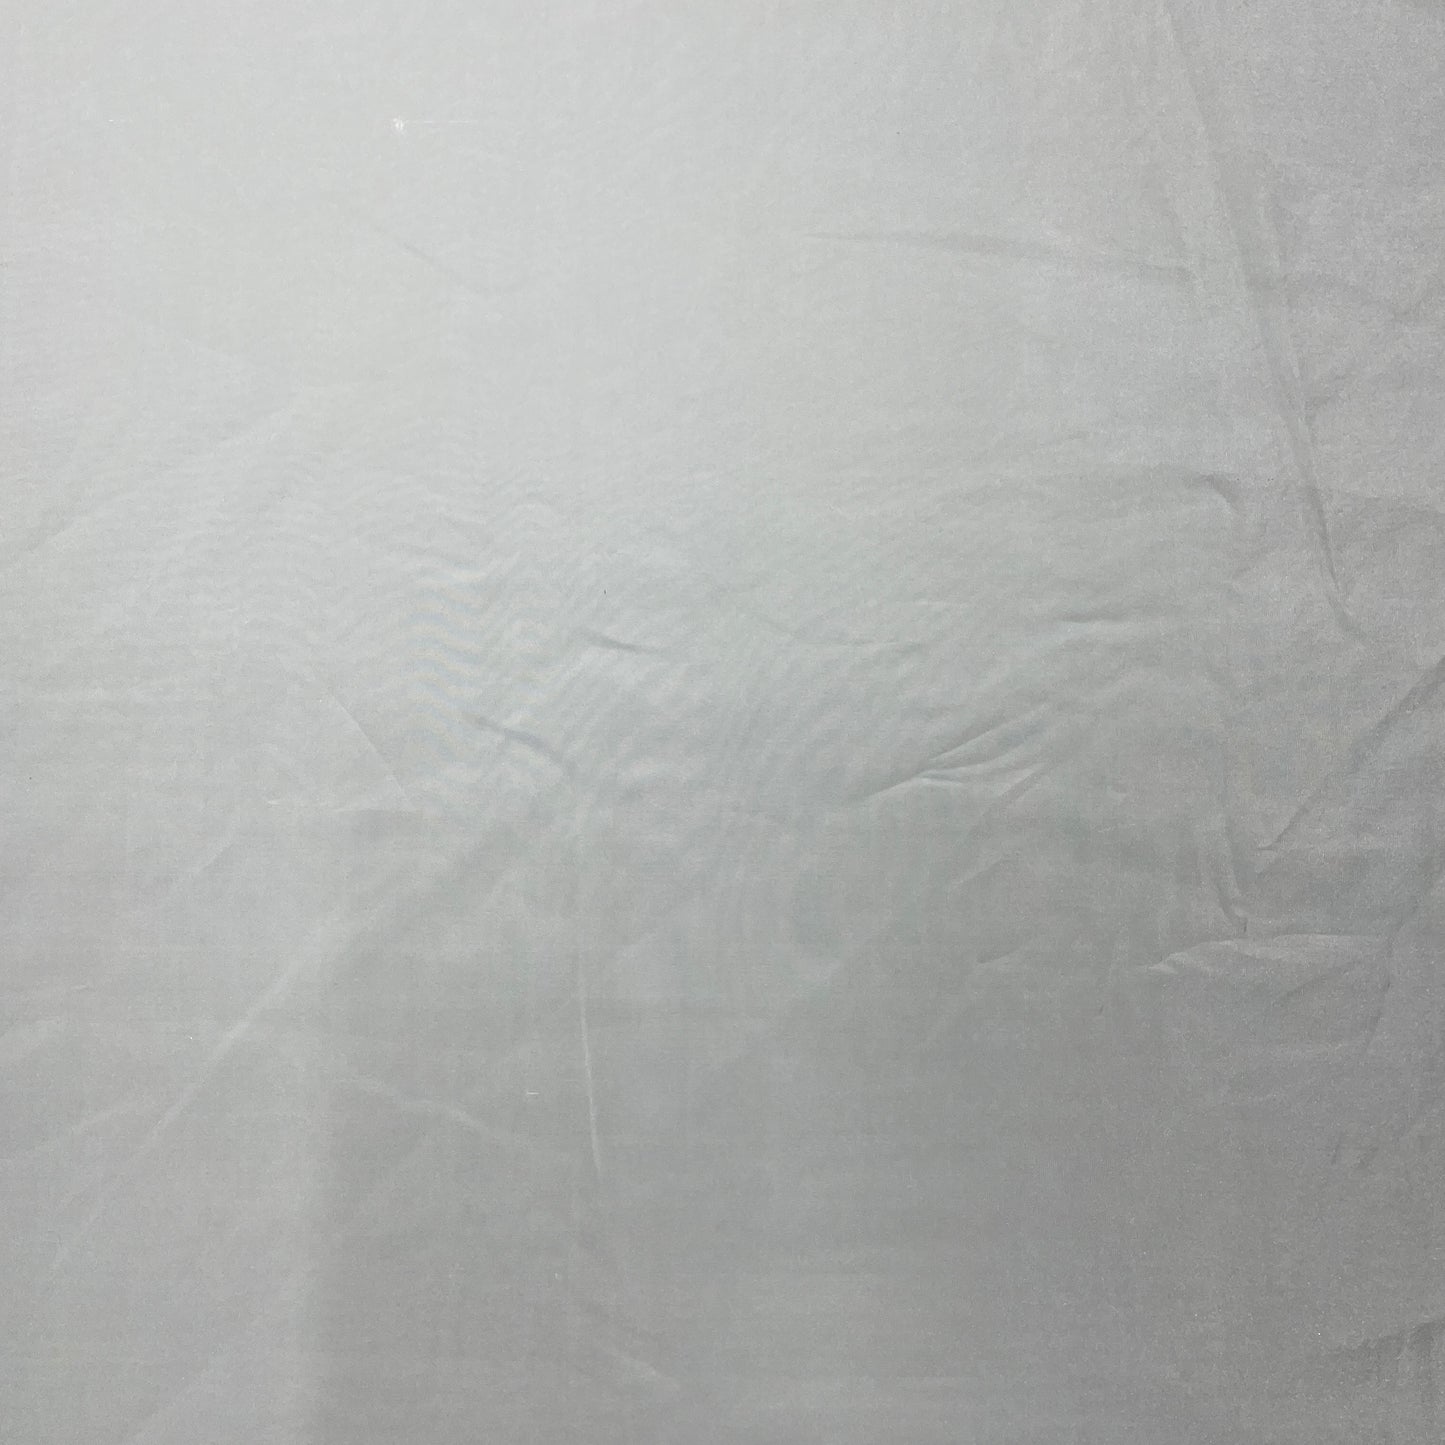 White Solid Silk Dyeable Fabric - TradeUNO